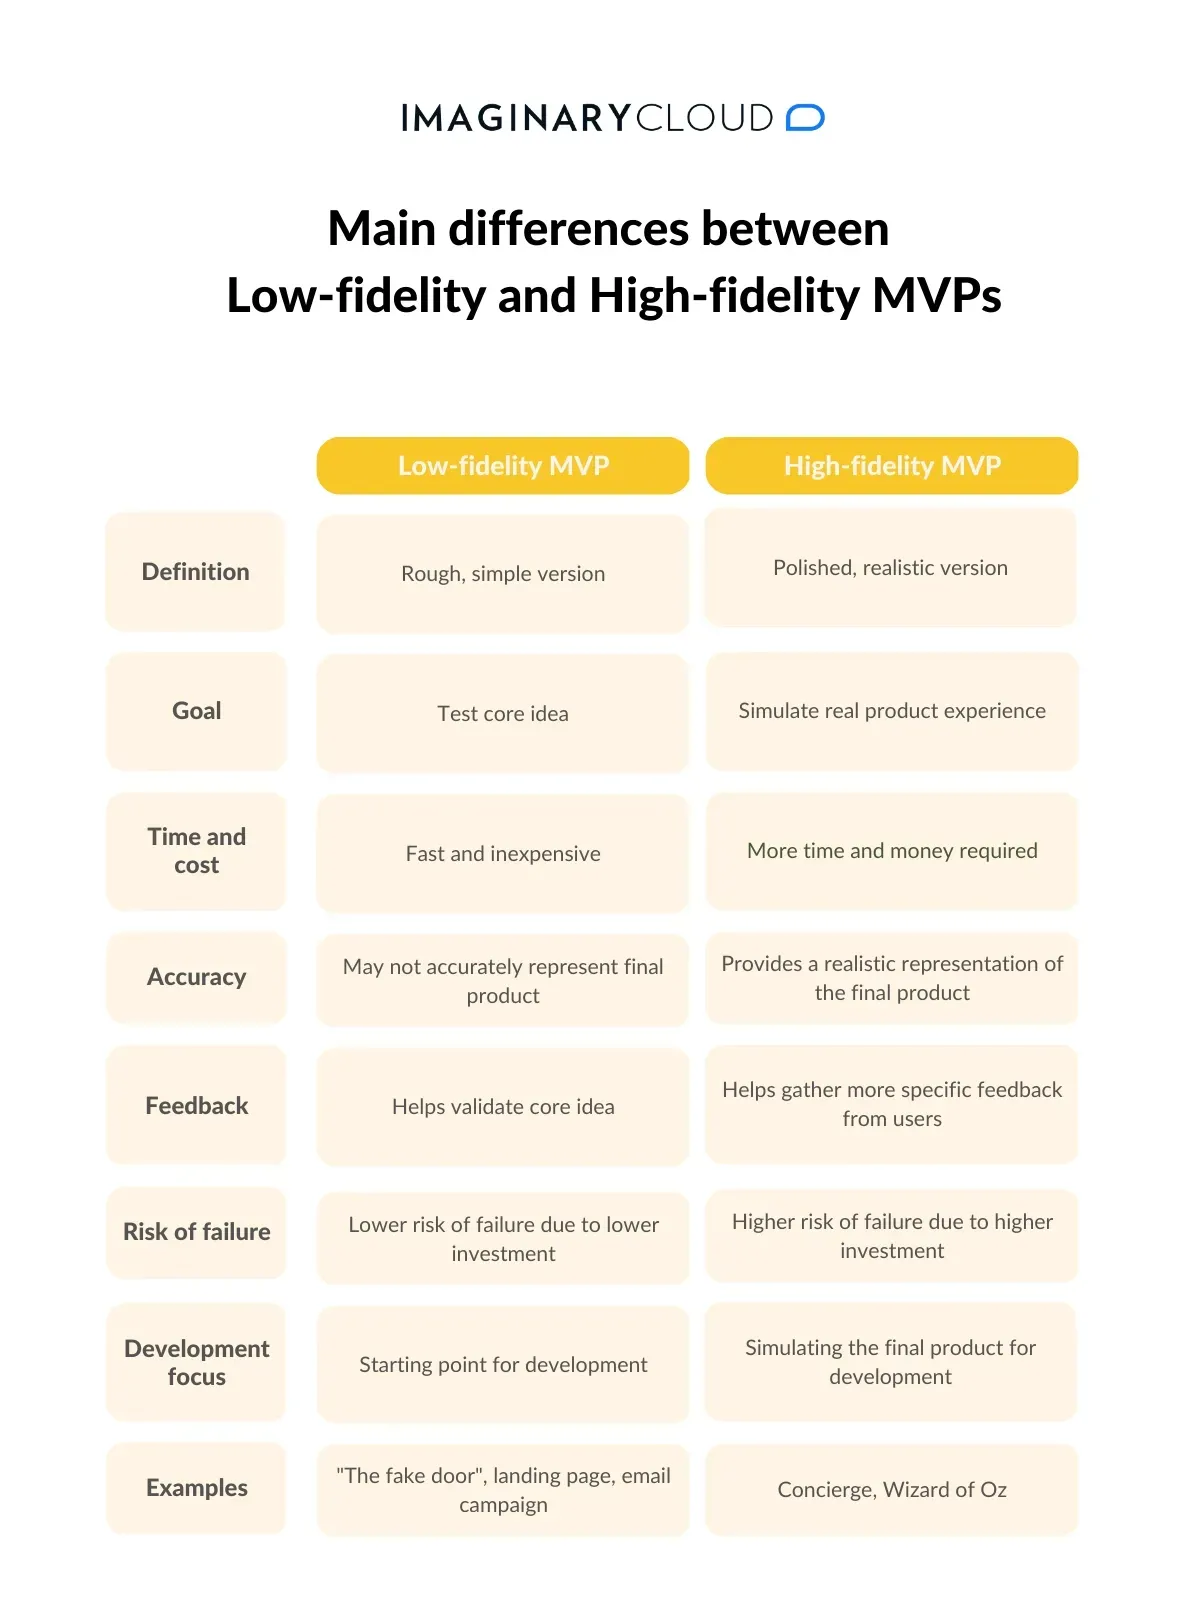 Table comparing two types of MVP: low-fidelity and high-fidelity MVPs.